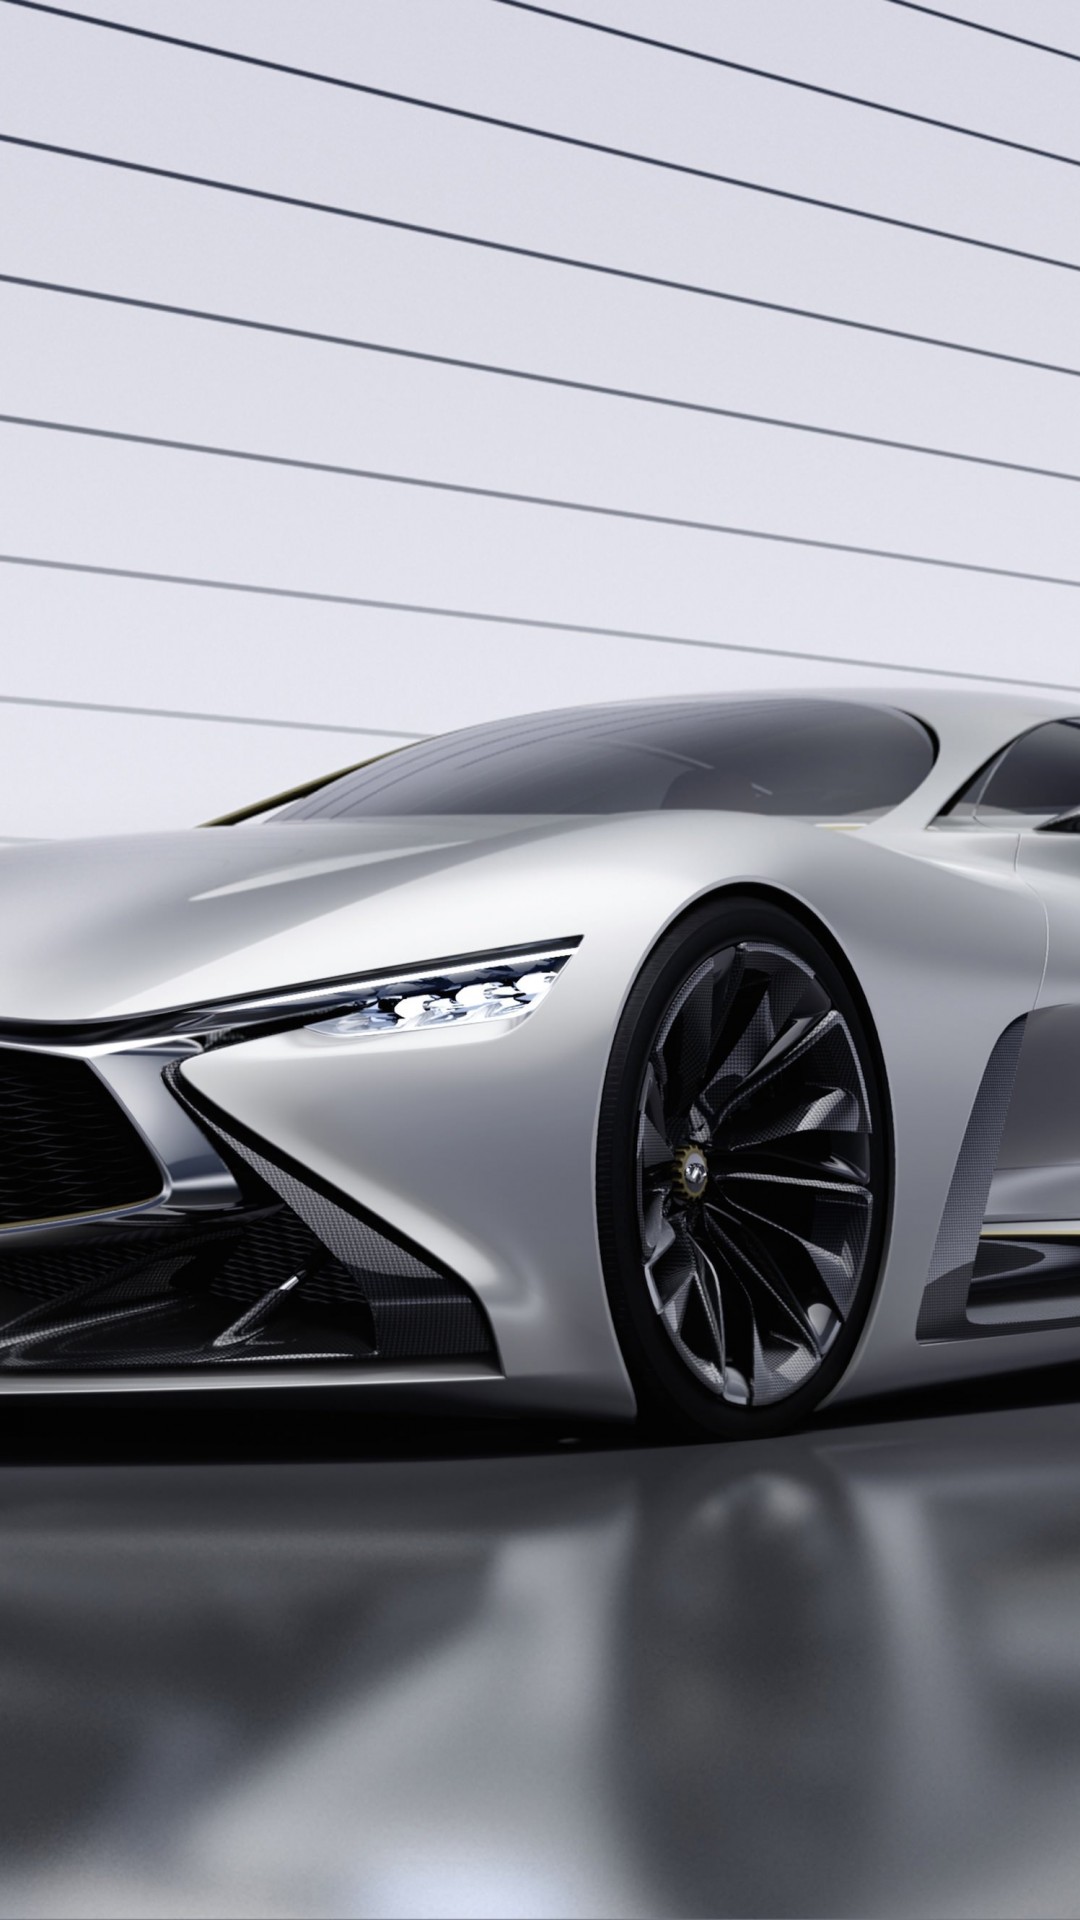 Infiniti Vision GT Concept Wallpaper for SONY Xperia Z1